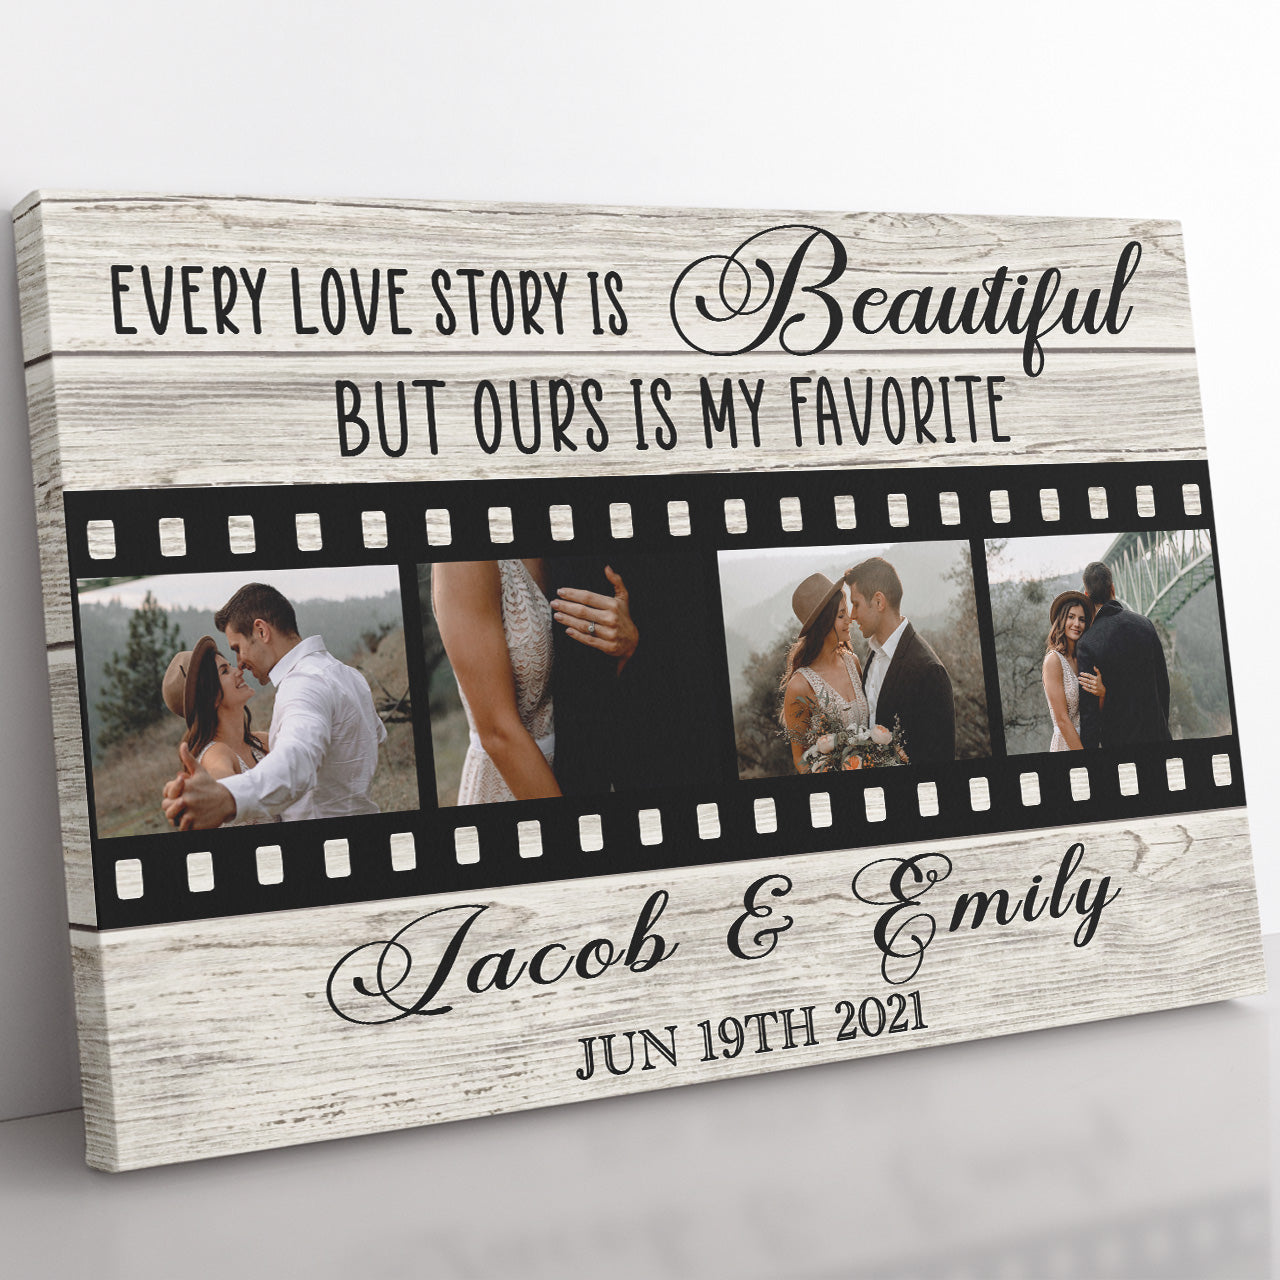 Personalized Canvas Gift For Wife, Every Love Story is Beautiful Our is My Favorite Canvas, Anniversary Gift for Her